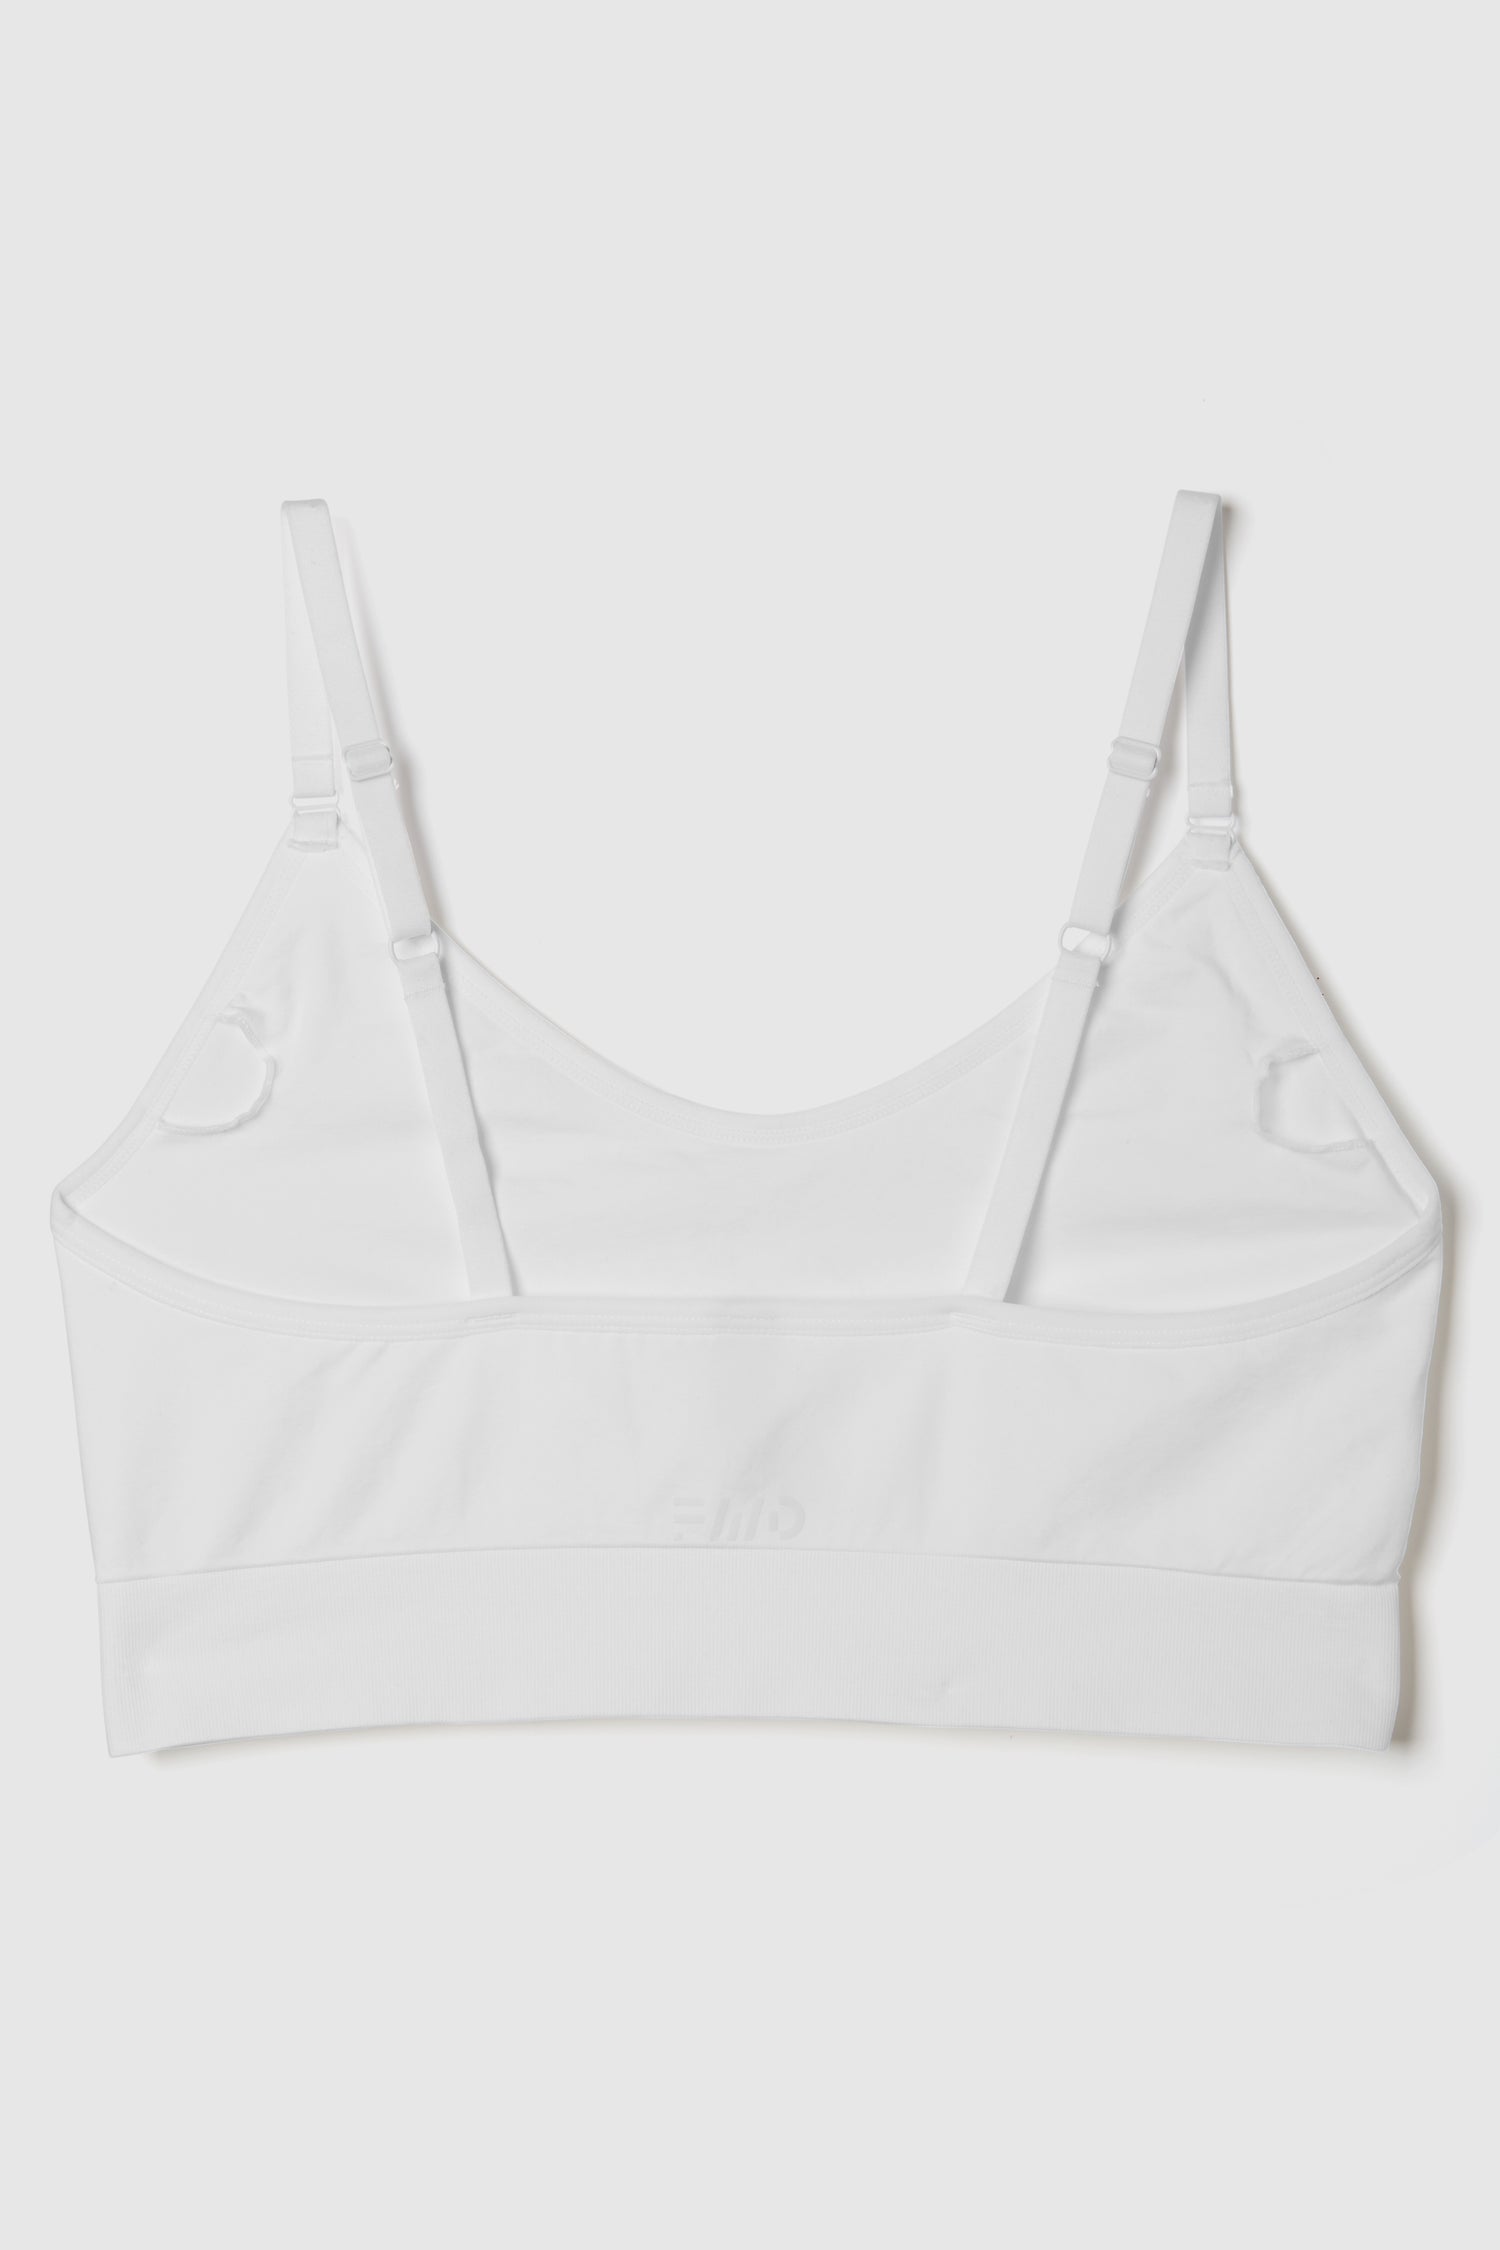 FWD Women's Seamless Sports Bra, Low Impact, Removable Pads - BEST